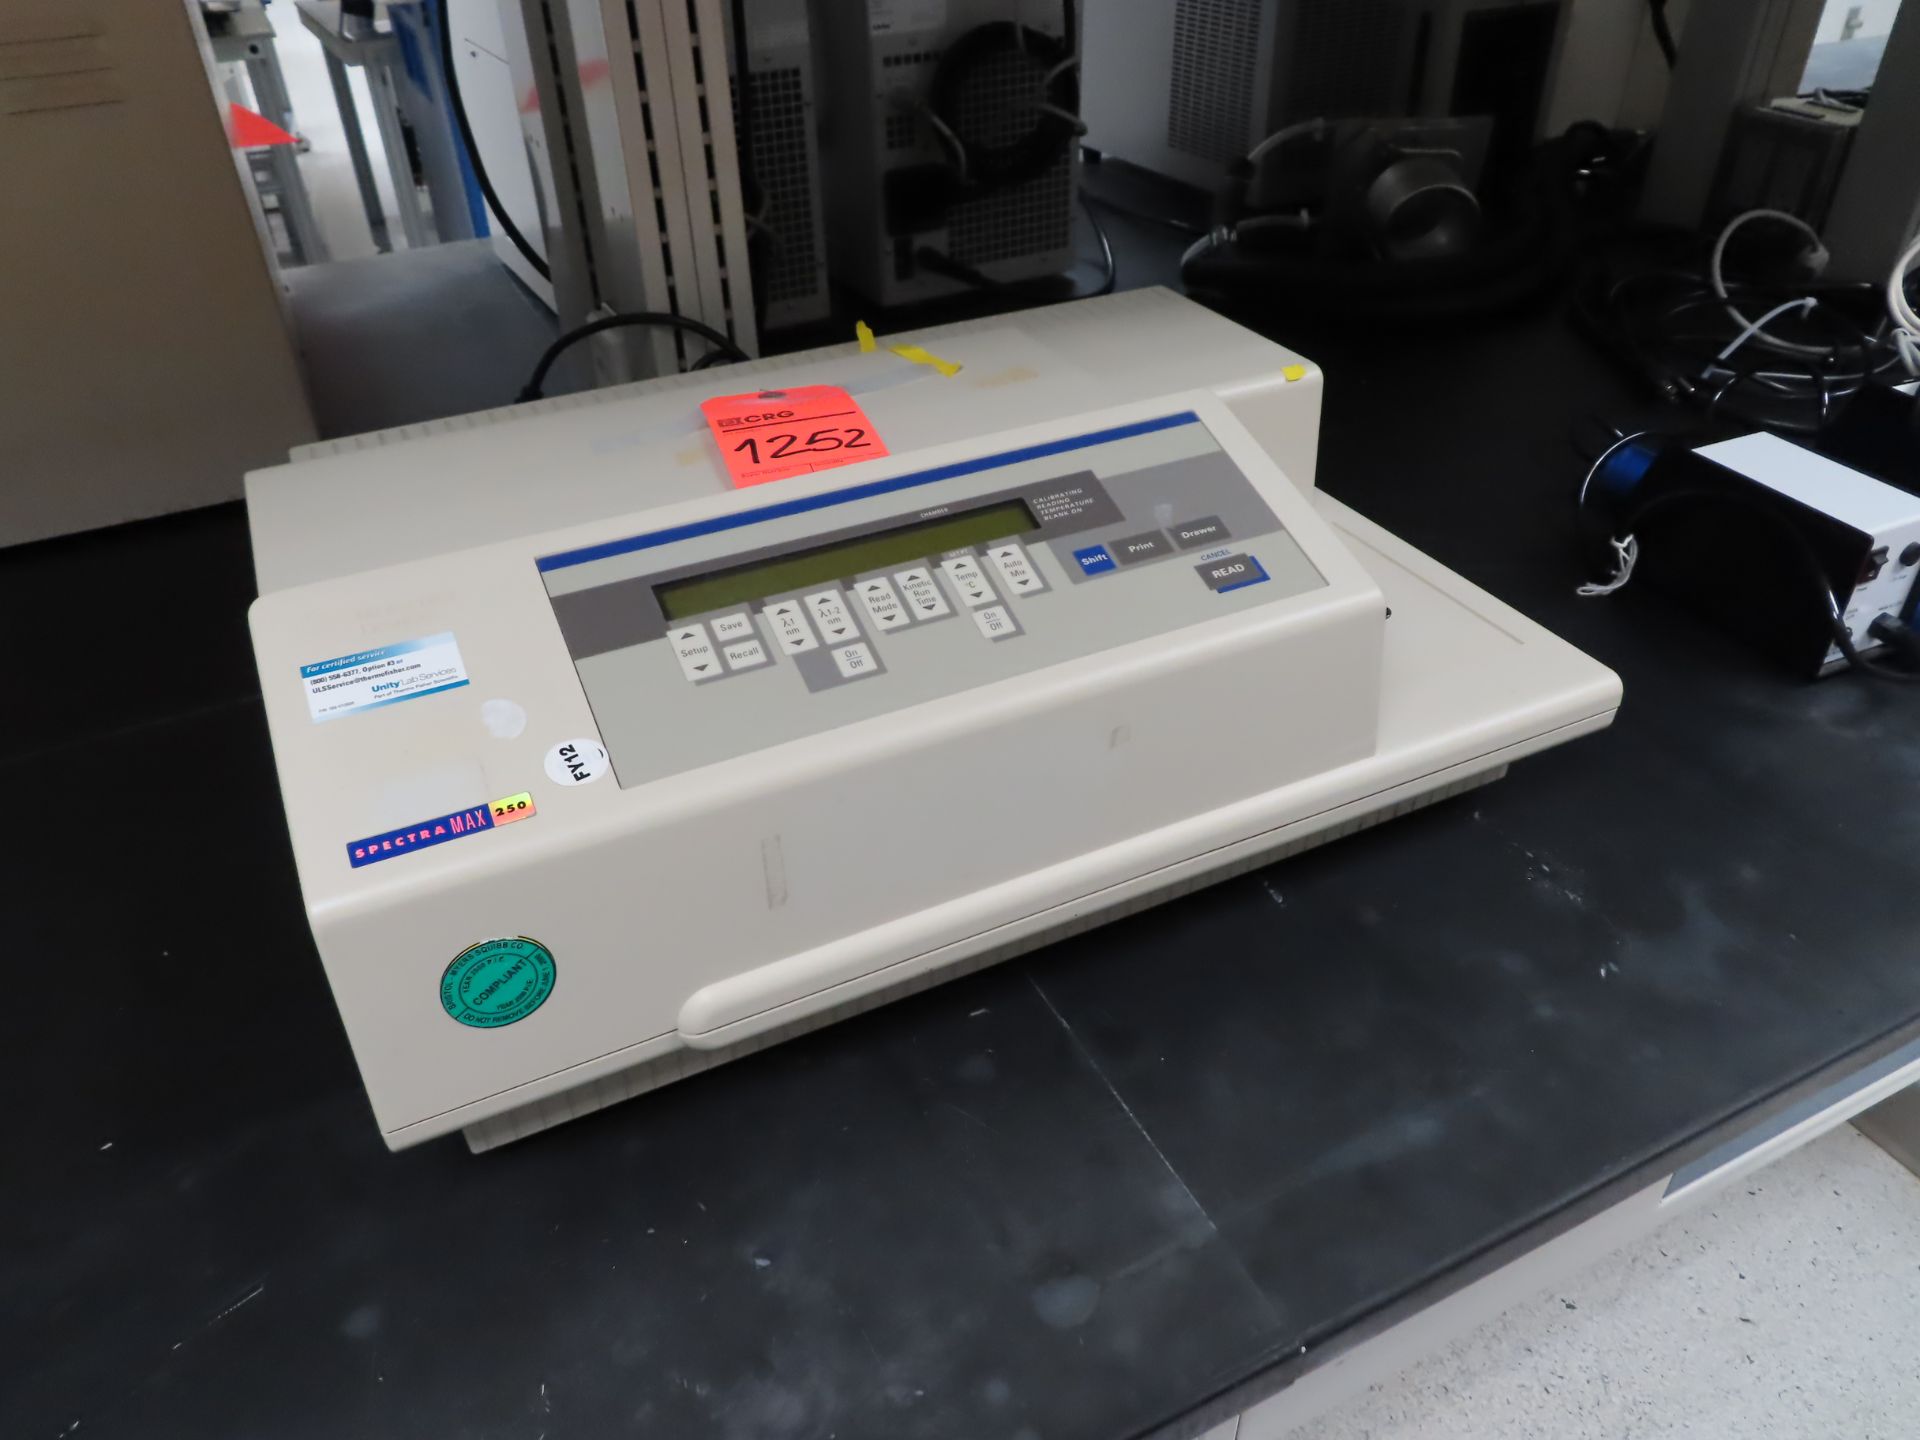 Molecular Devices Spectra Max 250 microplate reader, located in building 5, 4th floor, room F485